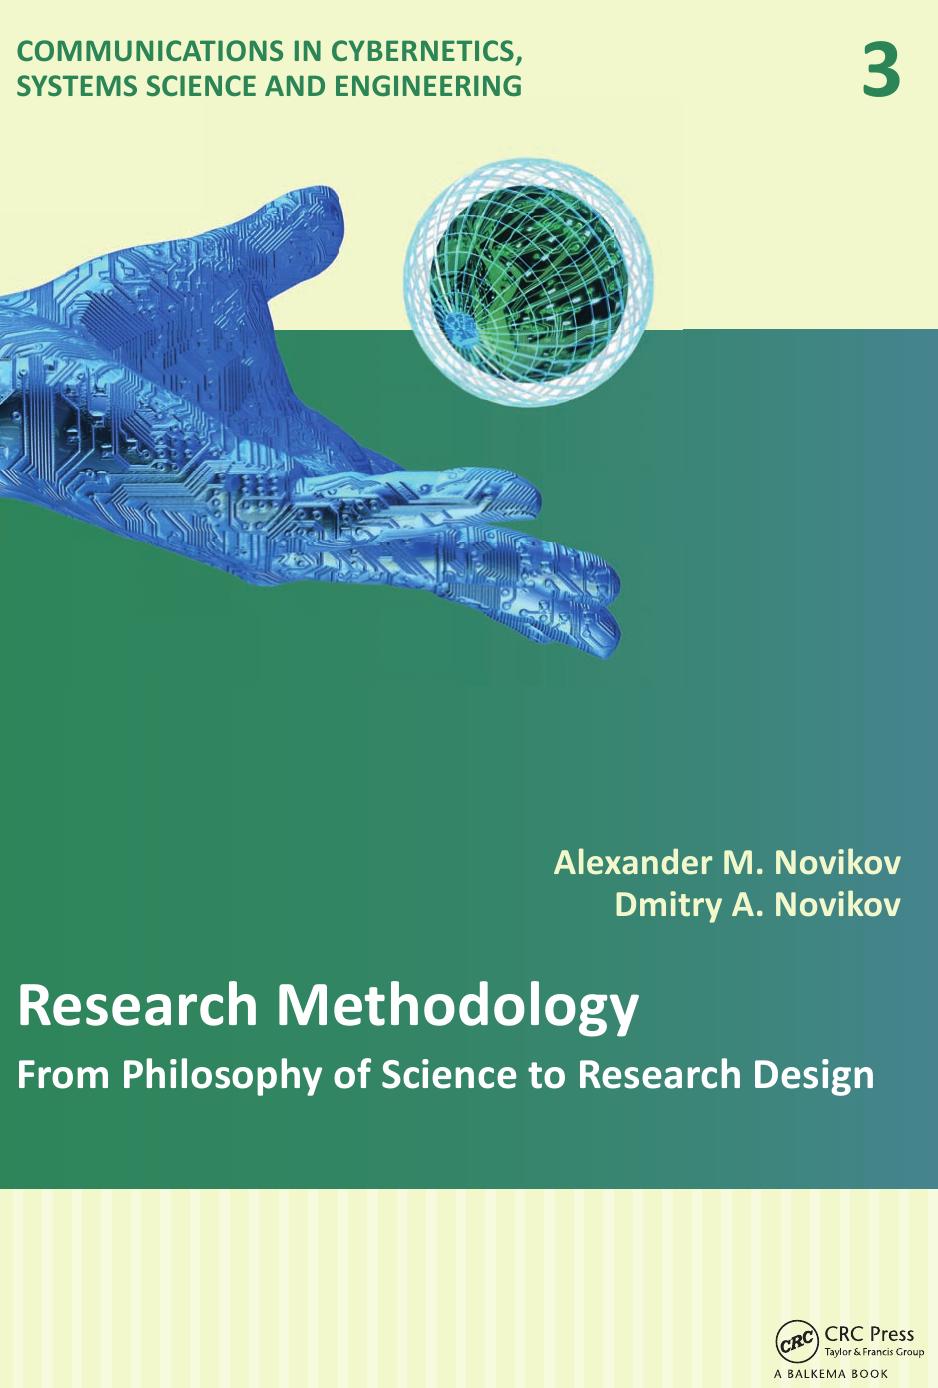 Research Methodology: From Philosophy of Science to Research Design